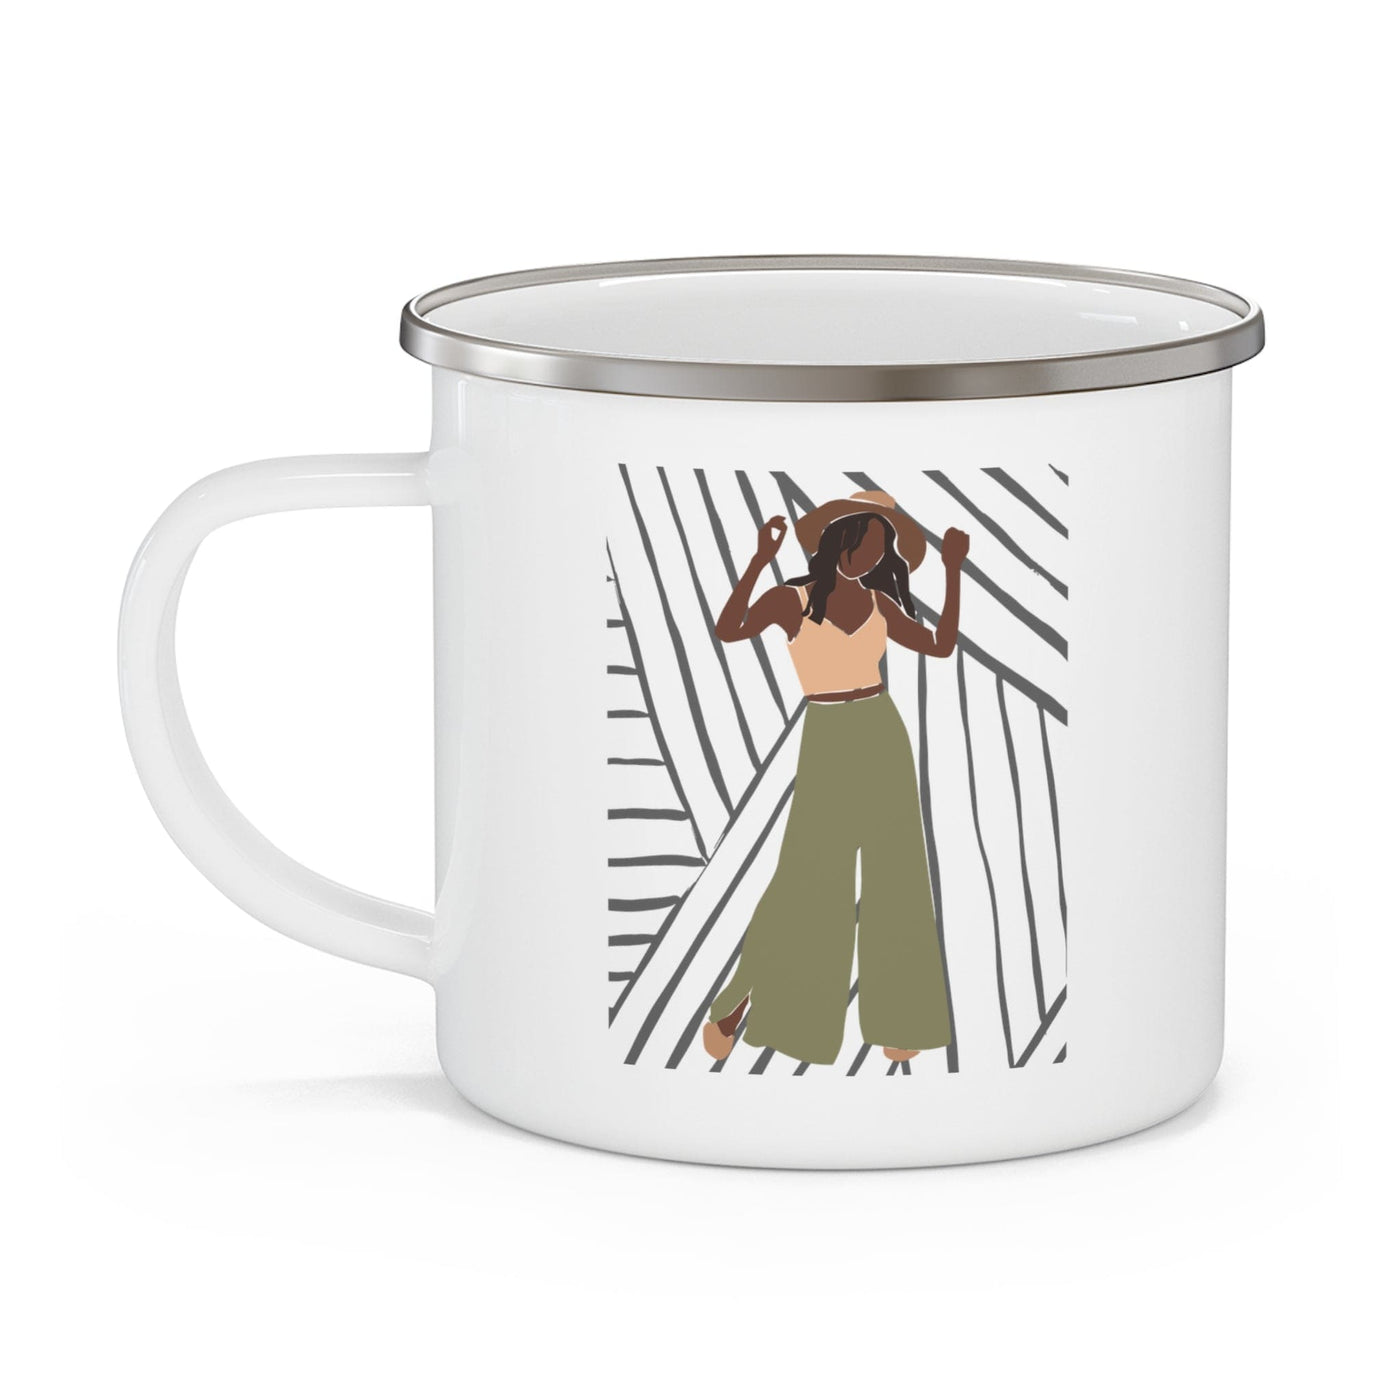 Enamel Camping Mug Say It Soul Its Her Groove Thing Positive Inspiration